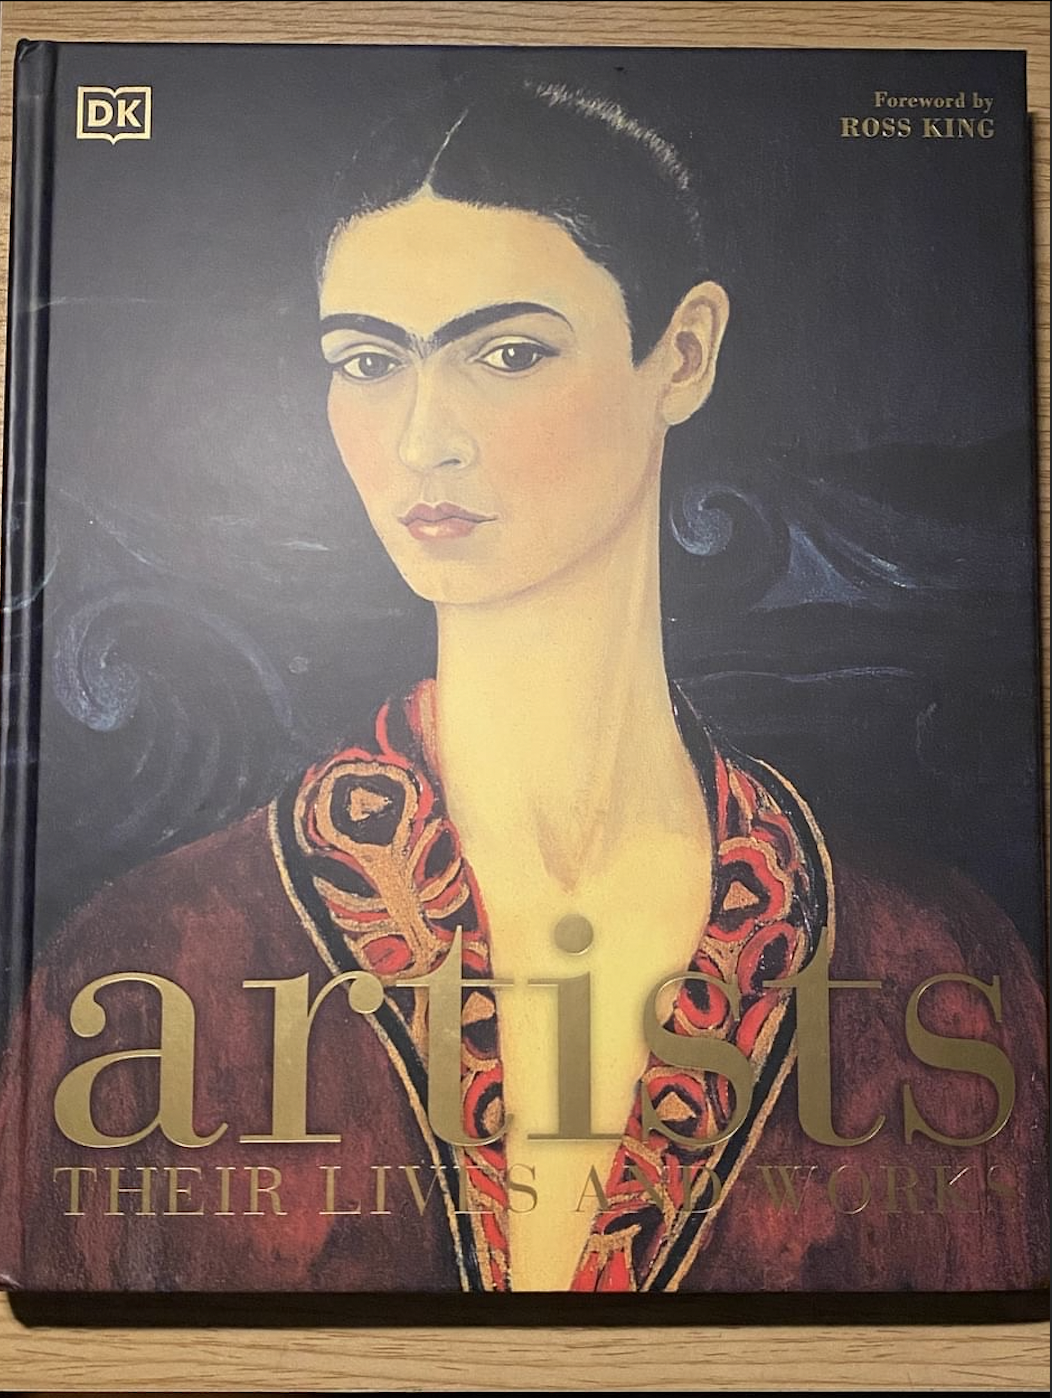 A copy of Artists: Their Lives and Work. by Ross King featuring Van Gogh